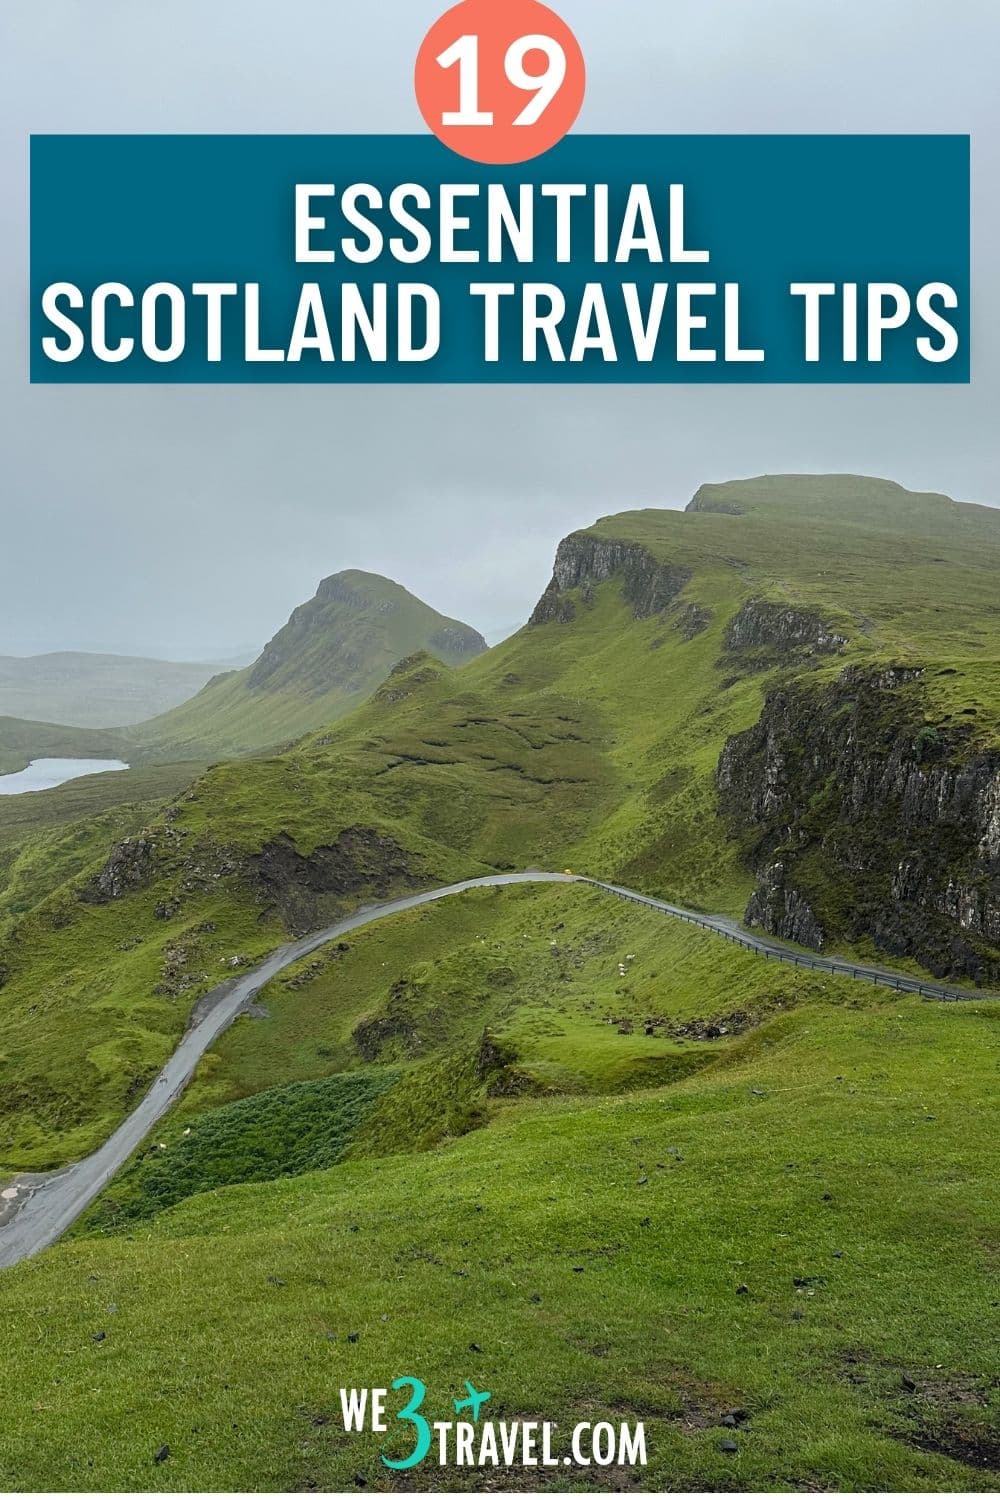 Planning your first trip to Scotland? Be prepared and make sure to read these Scotland travel tips before you go!